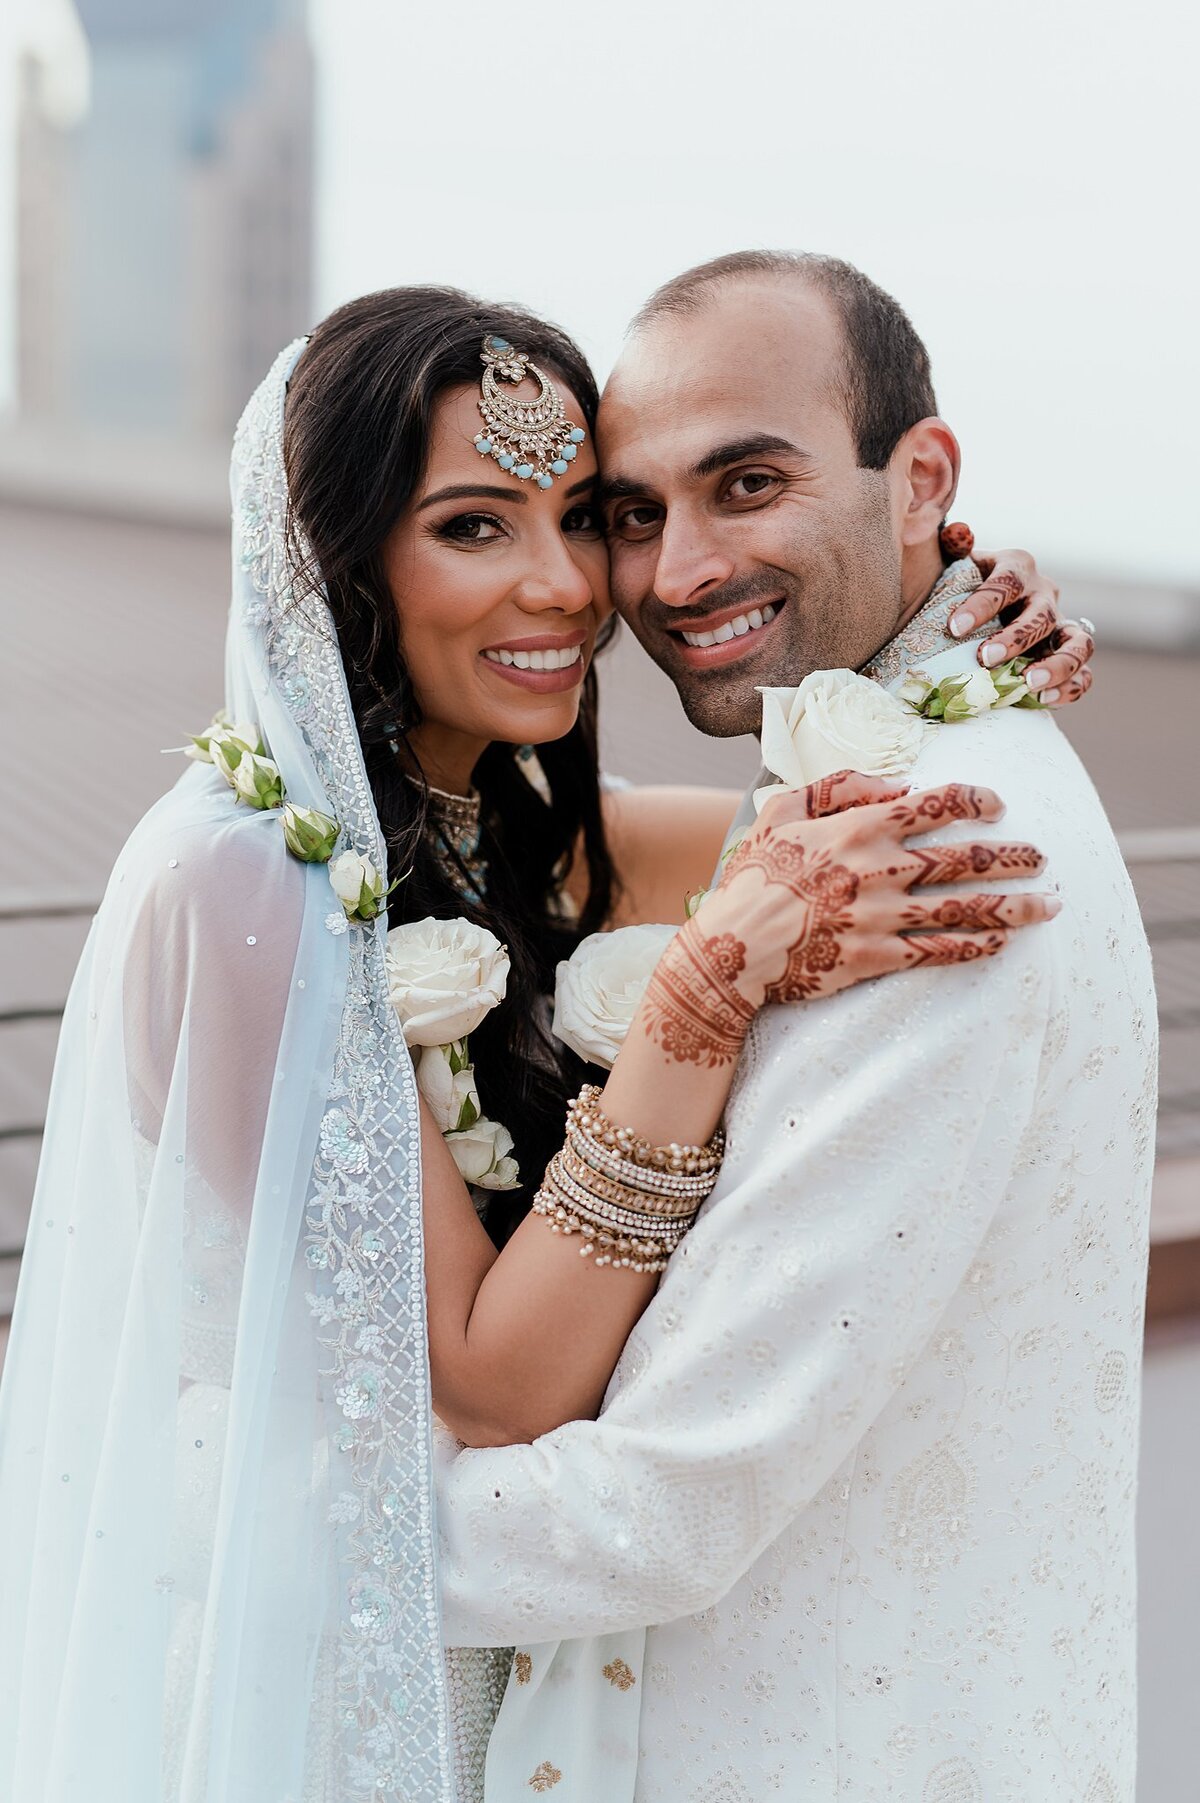 Indian bride with wedding henna mendhi on her hands smiles at the camera. The Hindu bride is wearing a light blue dupatta shawl with light blue and gold Indian wedding jewelry and a white floral varmala garland. The Hindu groom is wearing a white sherwani with a white floral varmala garland and is smiling at the camera for their Nashville Indian Wedding.